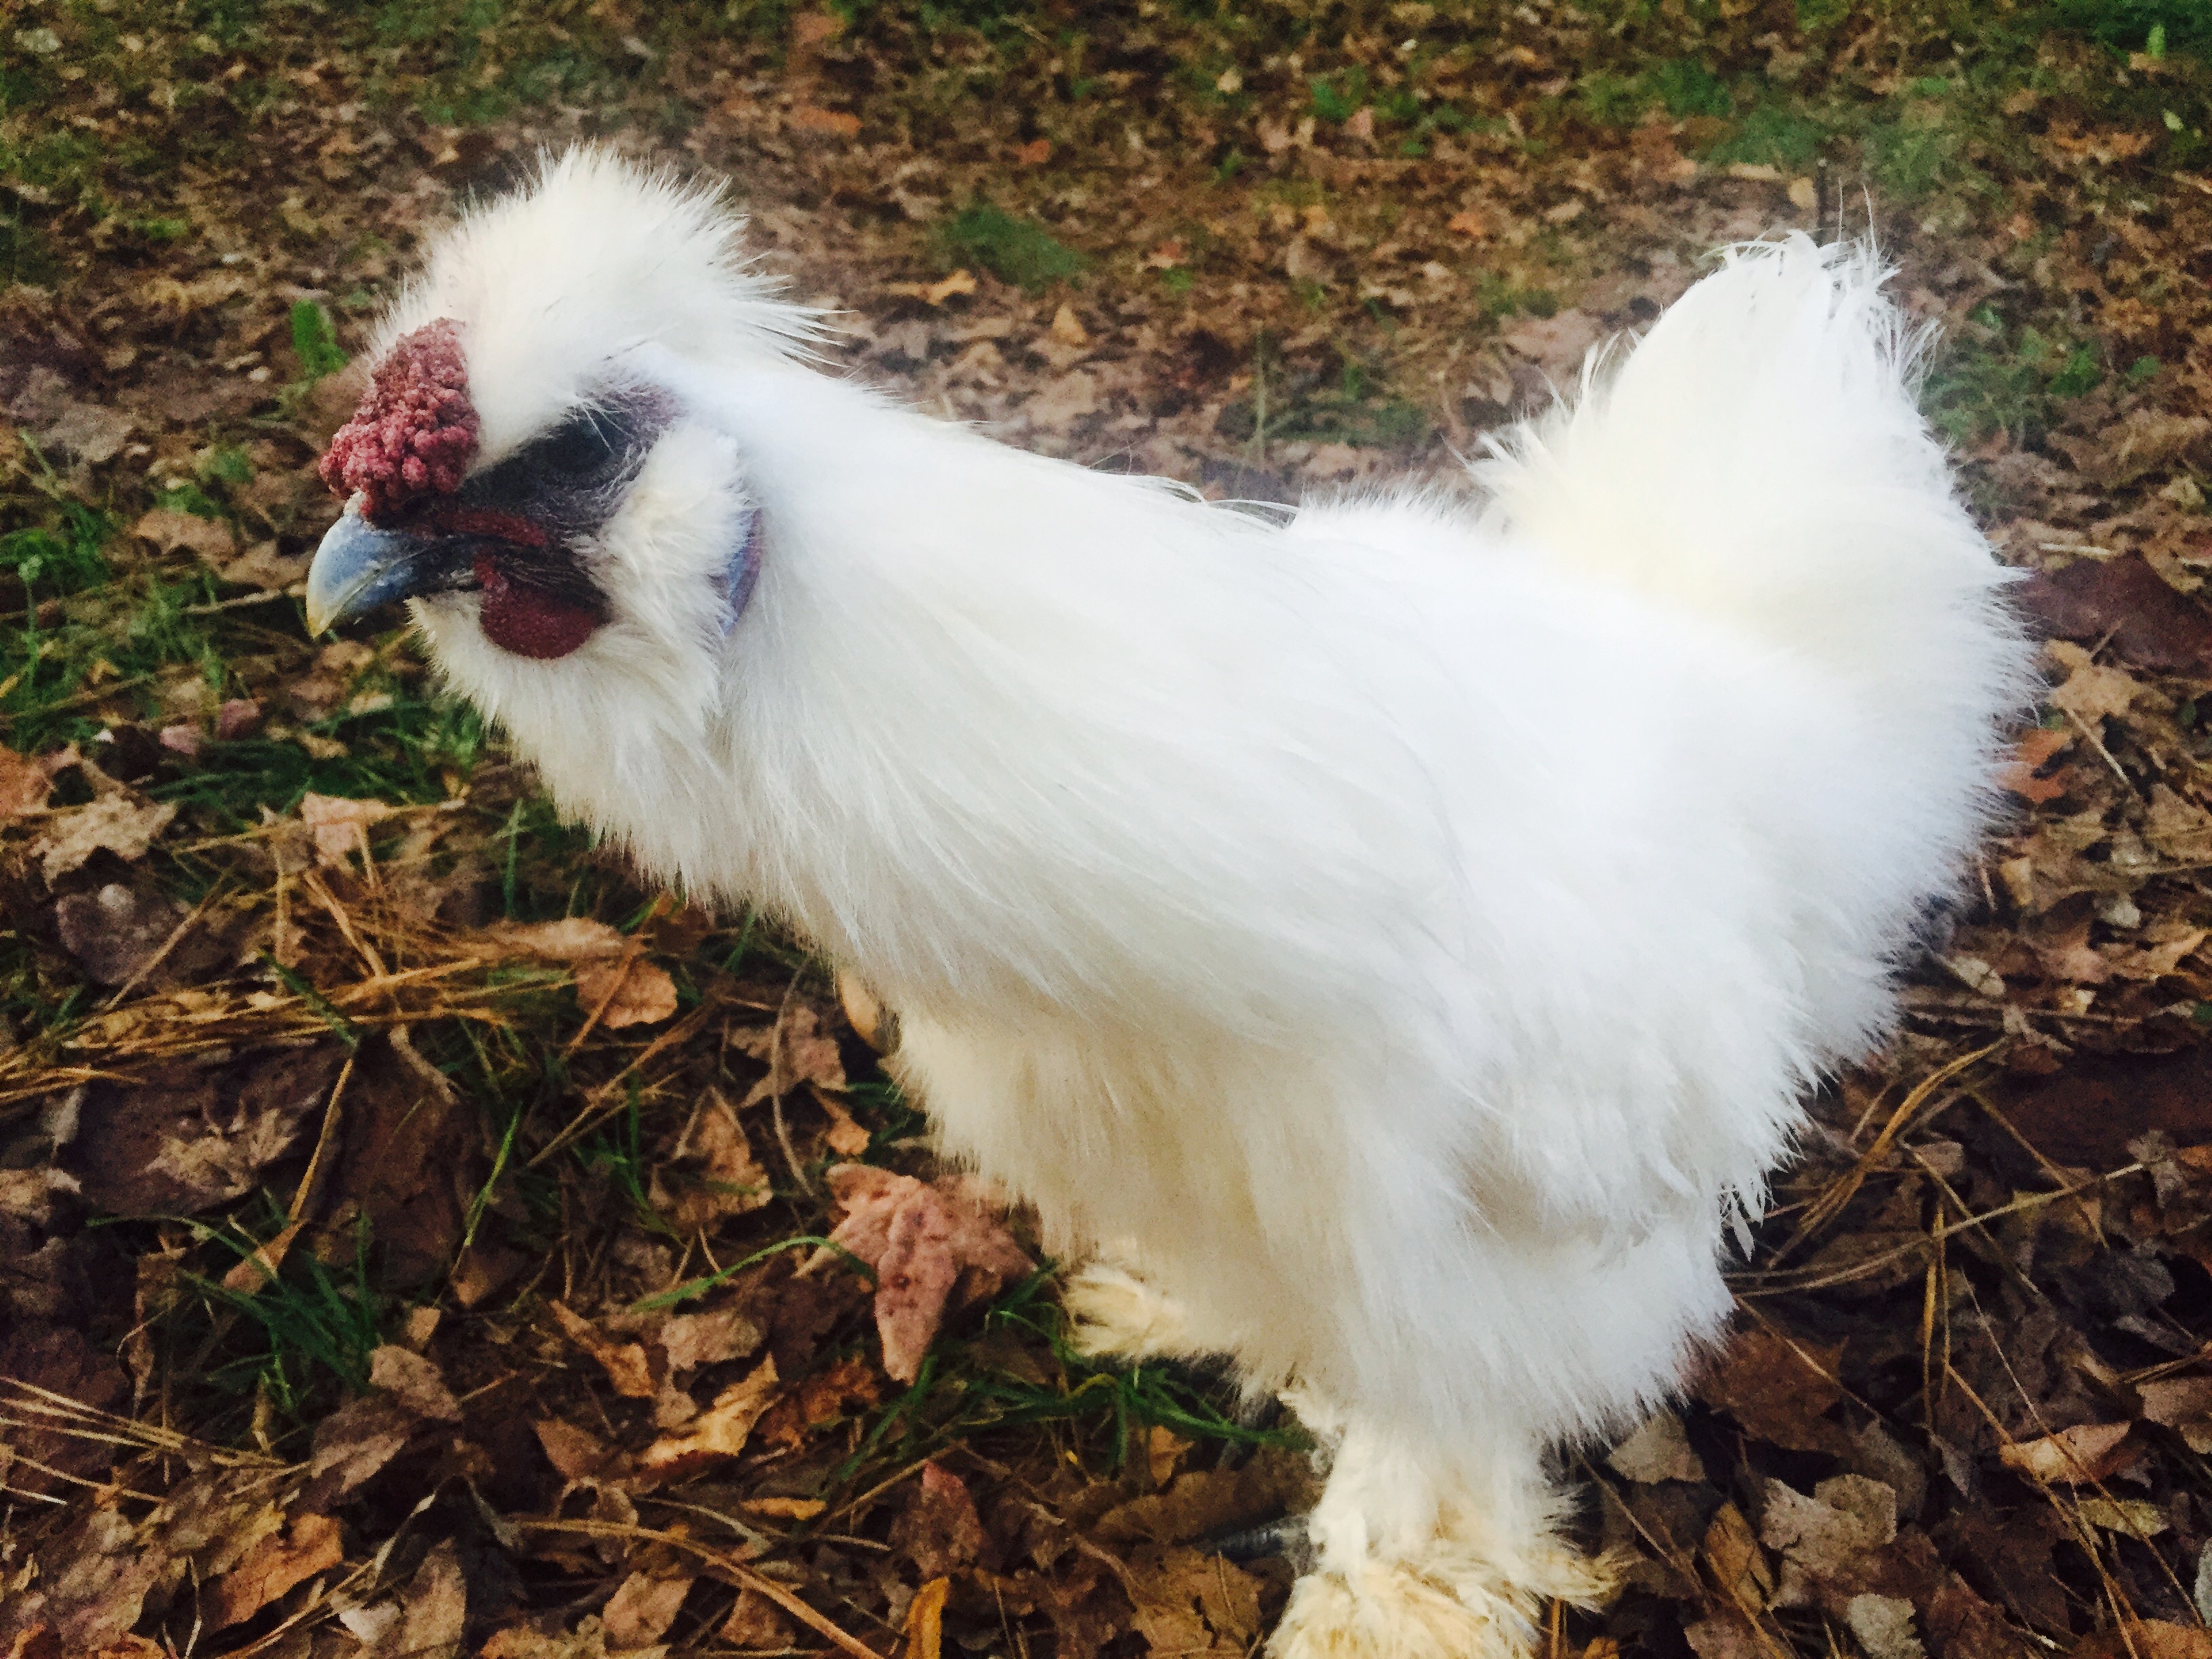 Diego, my adopted Silkie Cockrell.  Spoiled pet but he's all rooster.  Comes up beside me in late evening and jumps onto my hand so I will carry him to his roost in the coop.